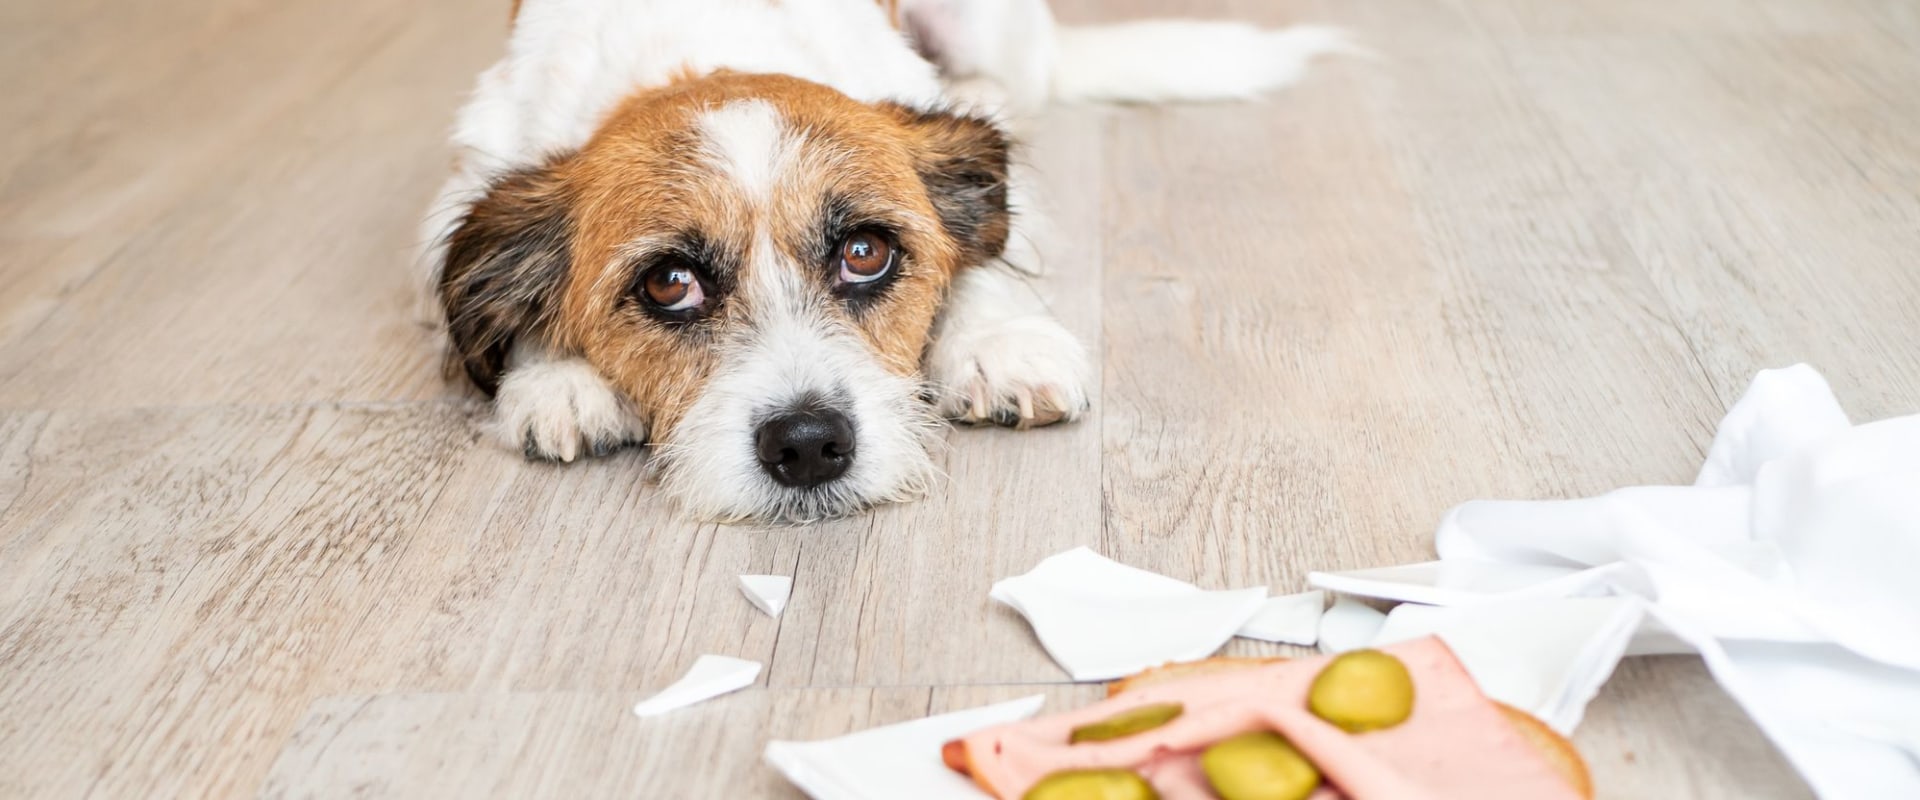 10 Most Dangerous Foods for Dogs: What to Avoid Feeding Your Pet